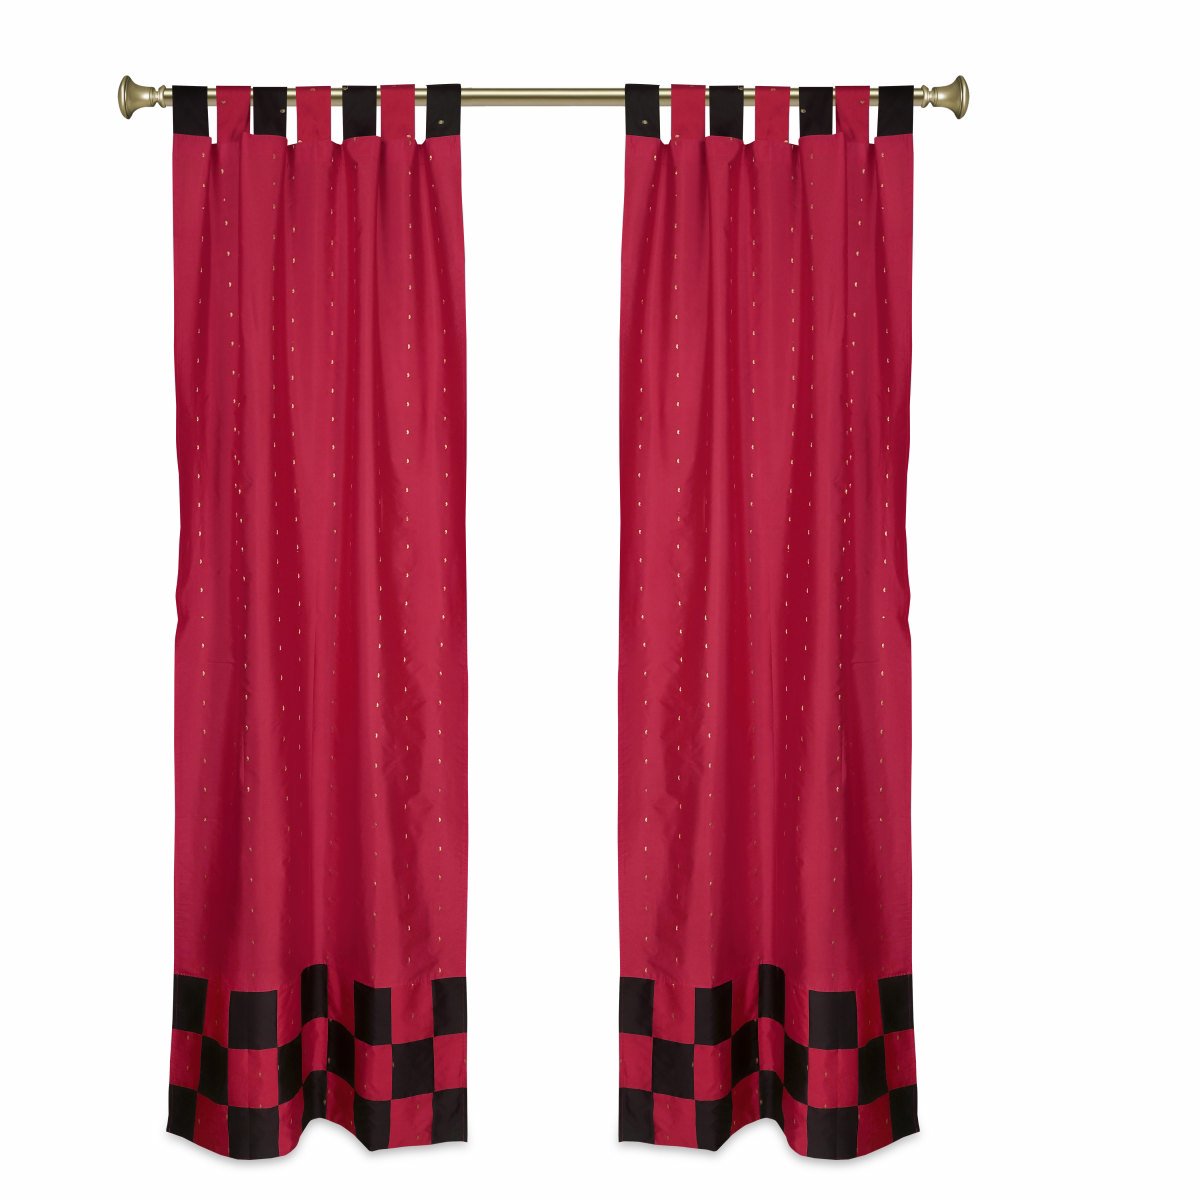 Indian Selections 2 Eclectic Red Indian Sari Curtains Tab Top Curtain drapes